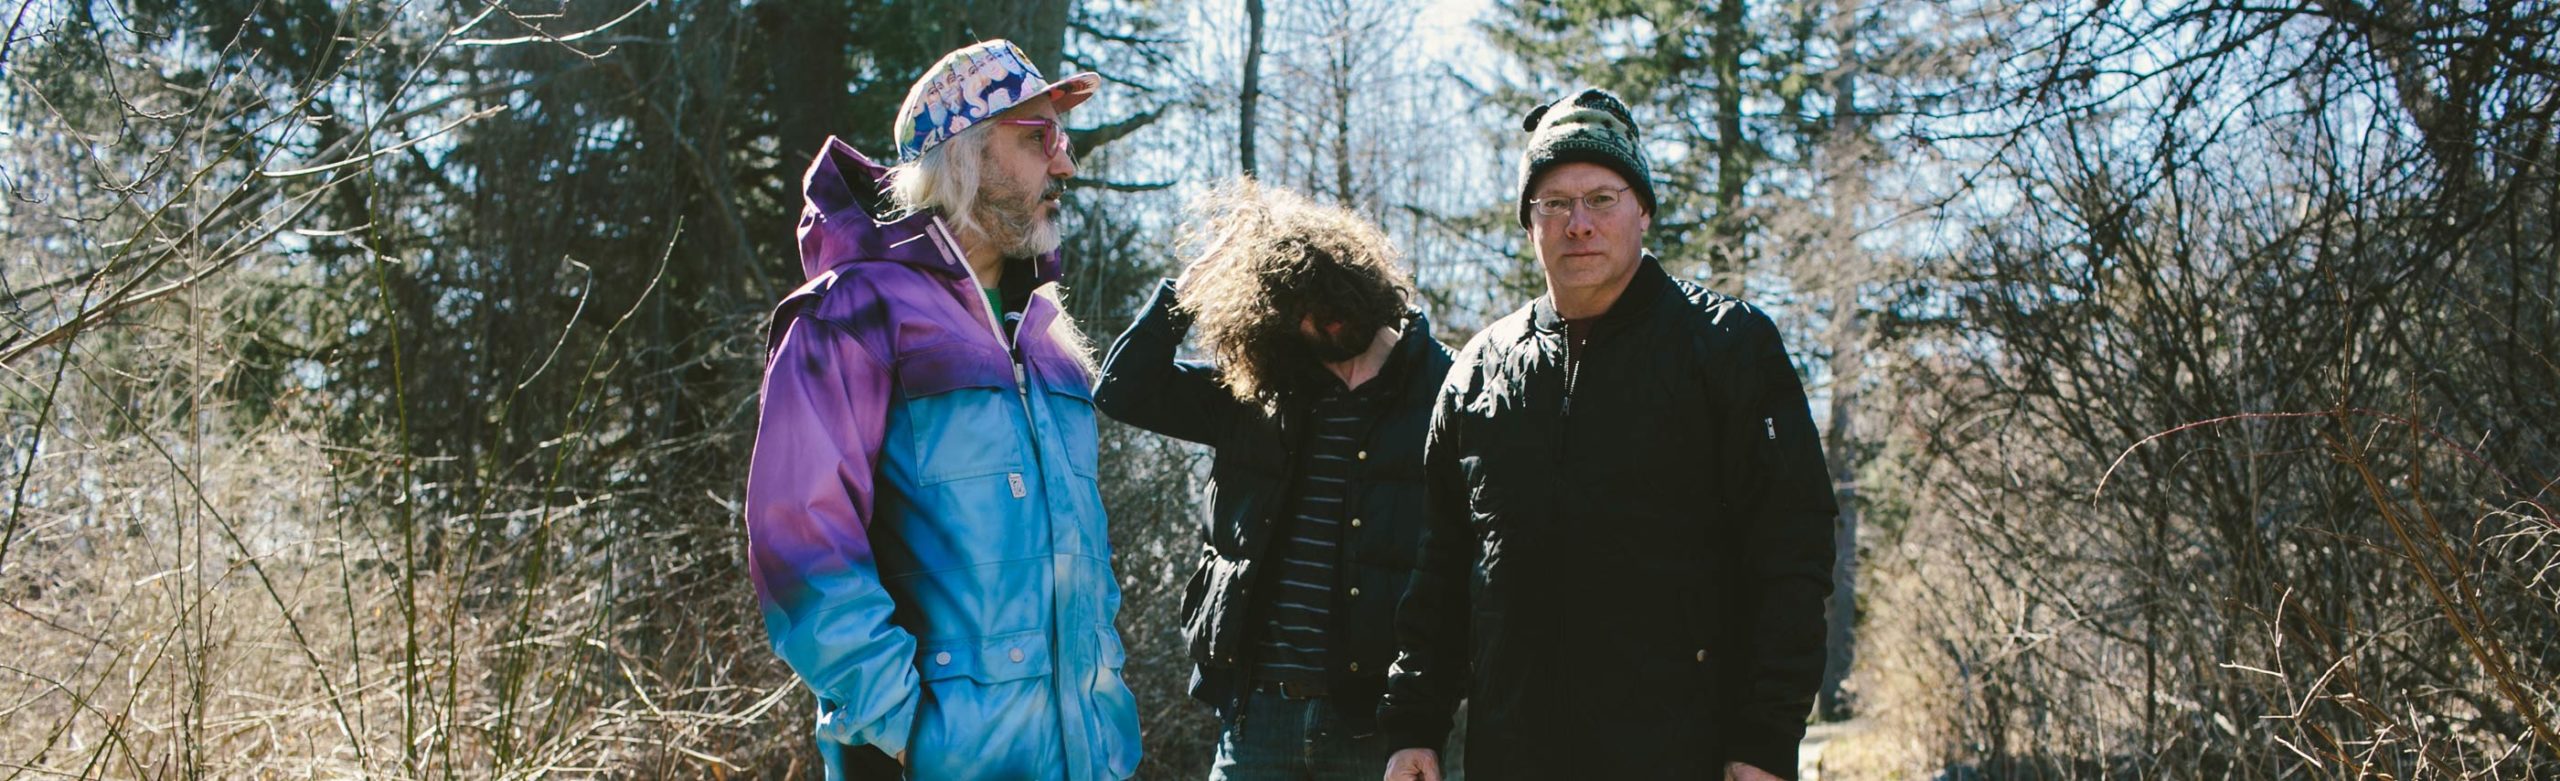 CANCELLED: Dinosaur Jr. at The Wilma Image